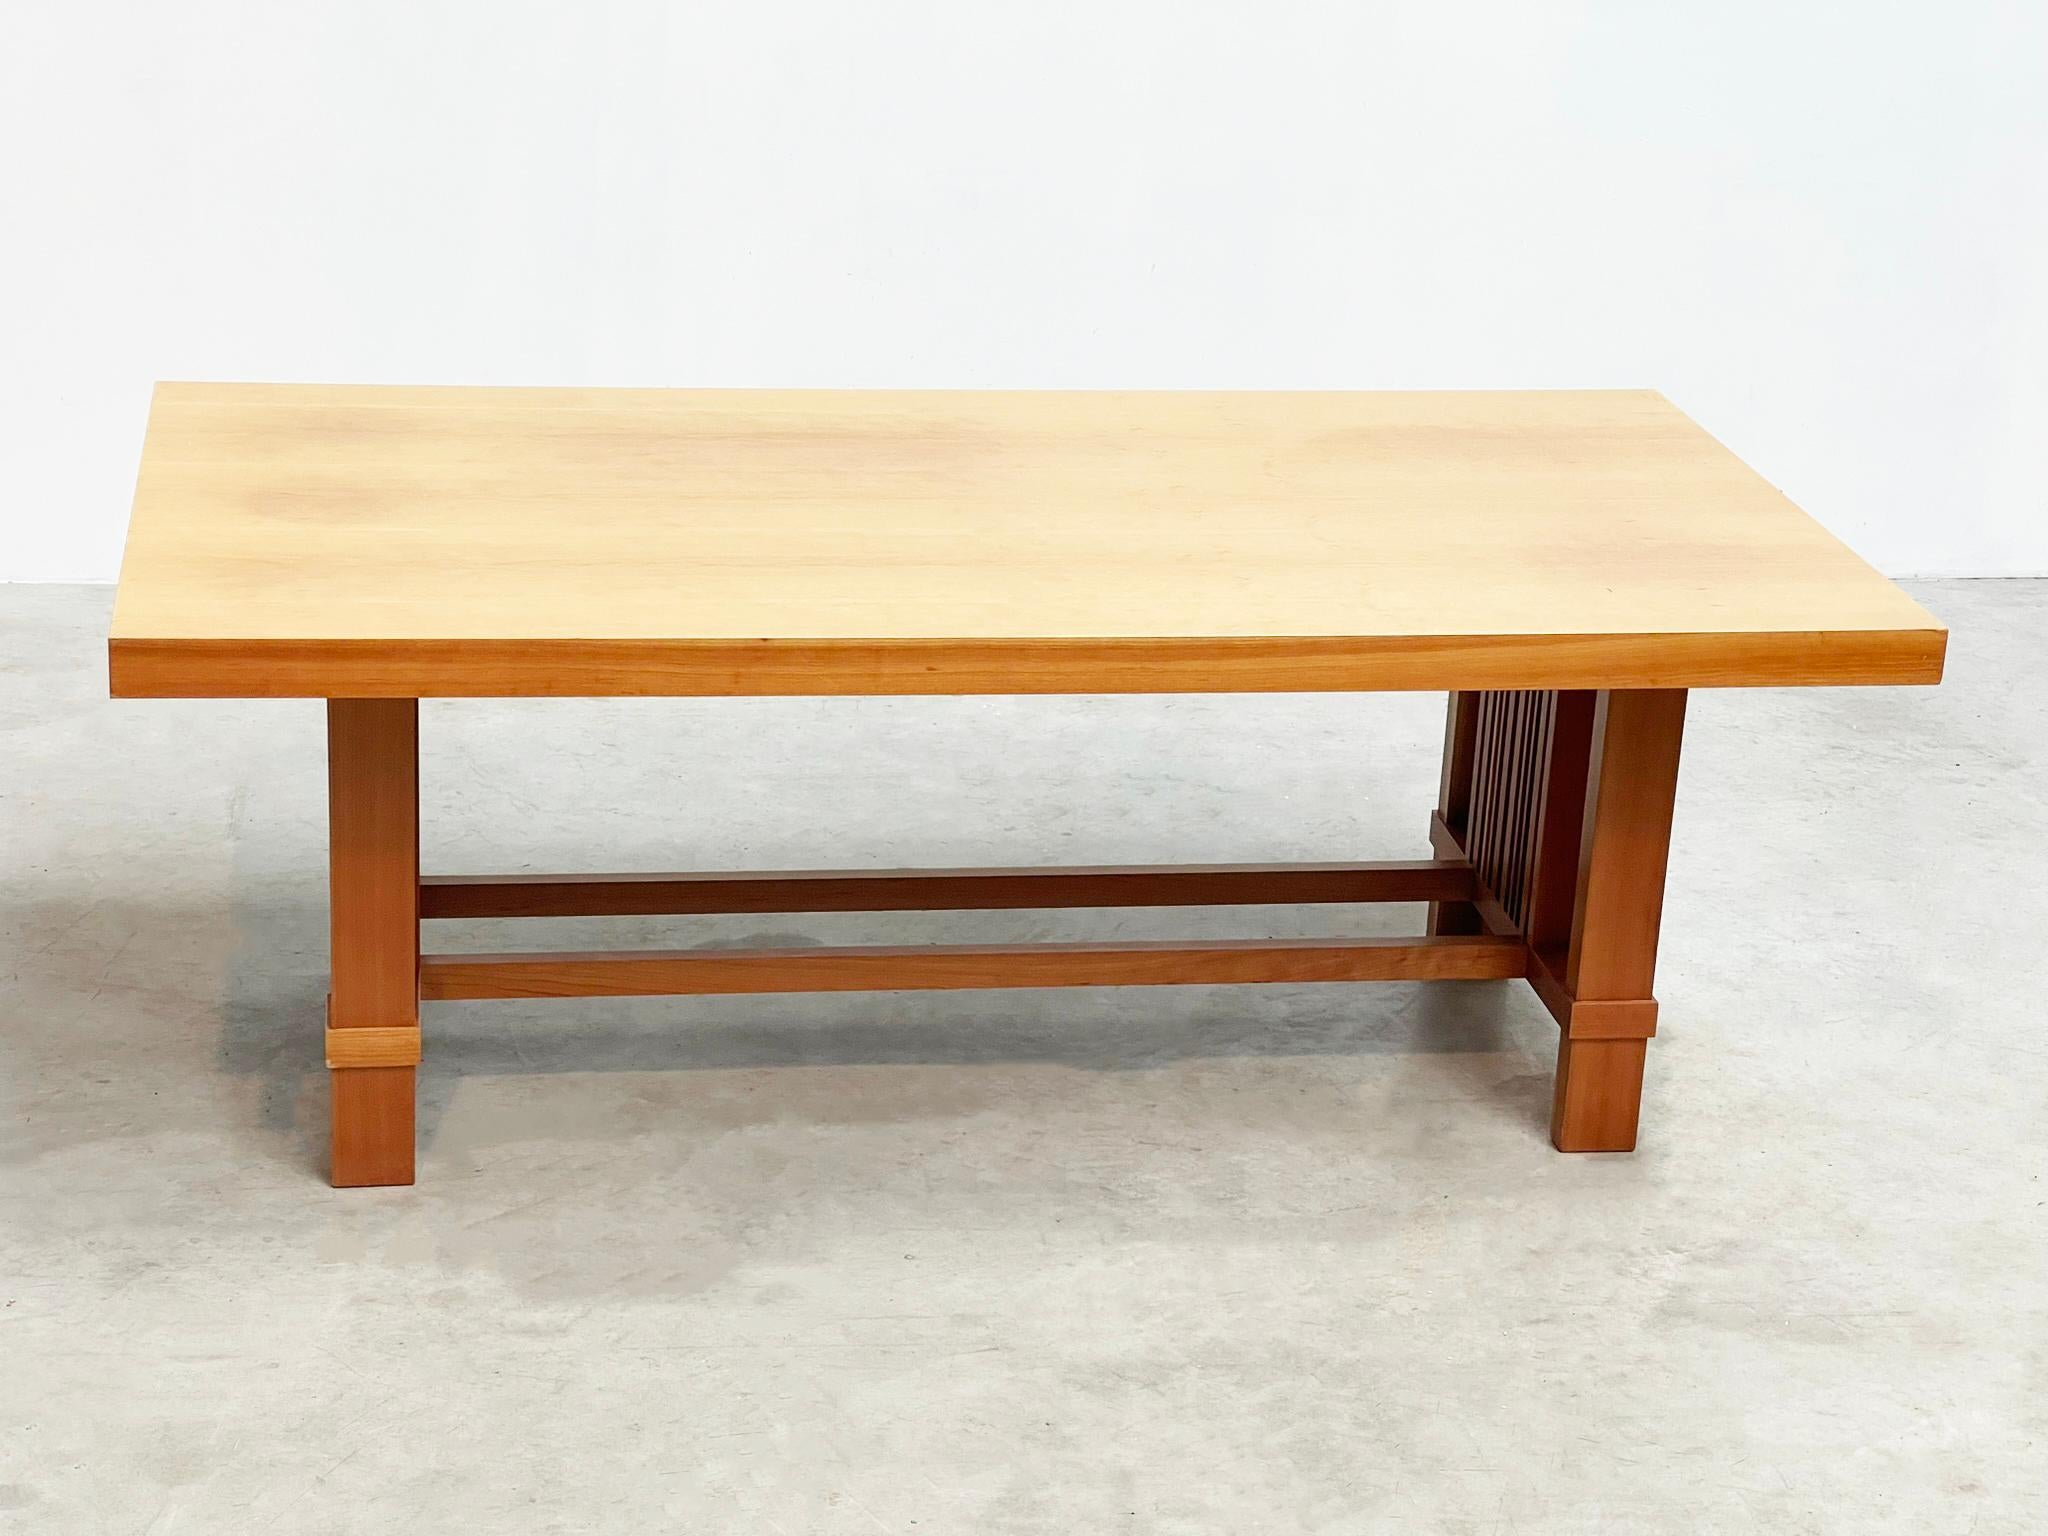 Late 20th Century Frank Lloyd Wright “608 Taliesin” Dining Table signed by Cassina, 1986 For Sale